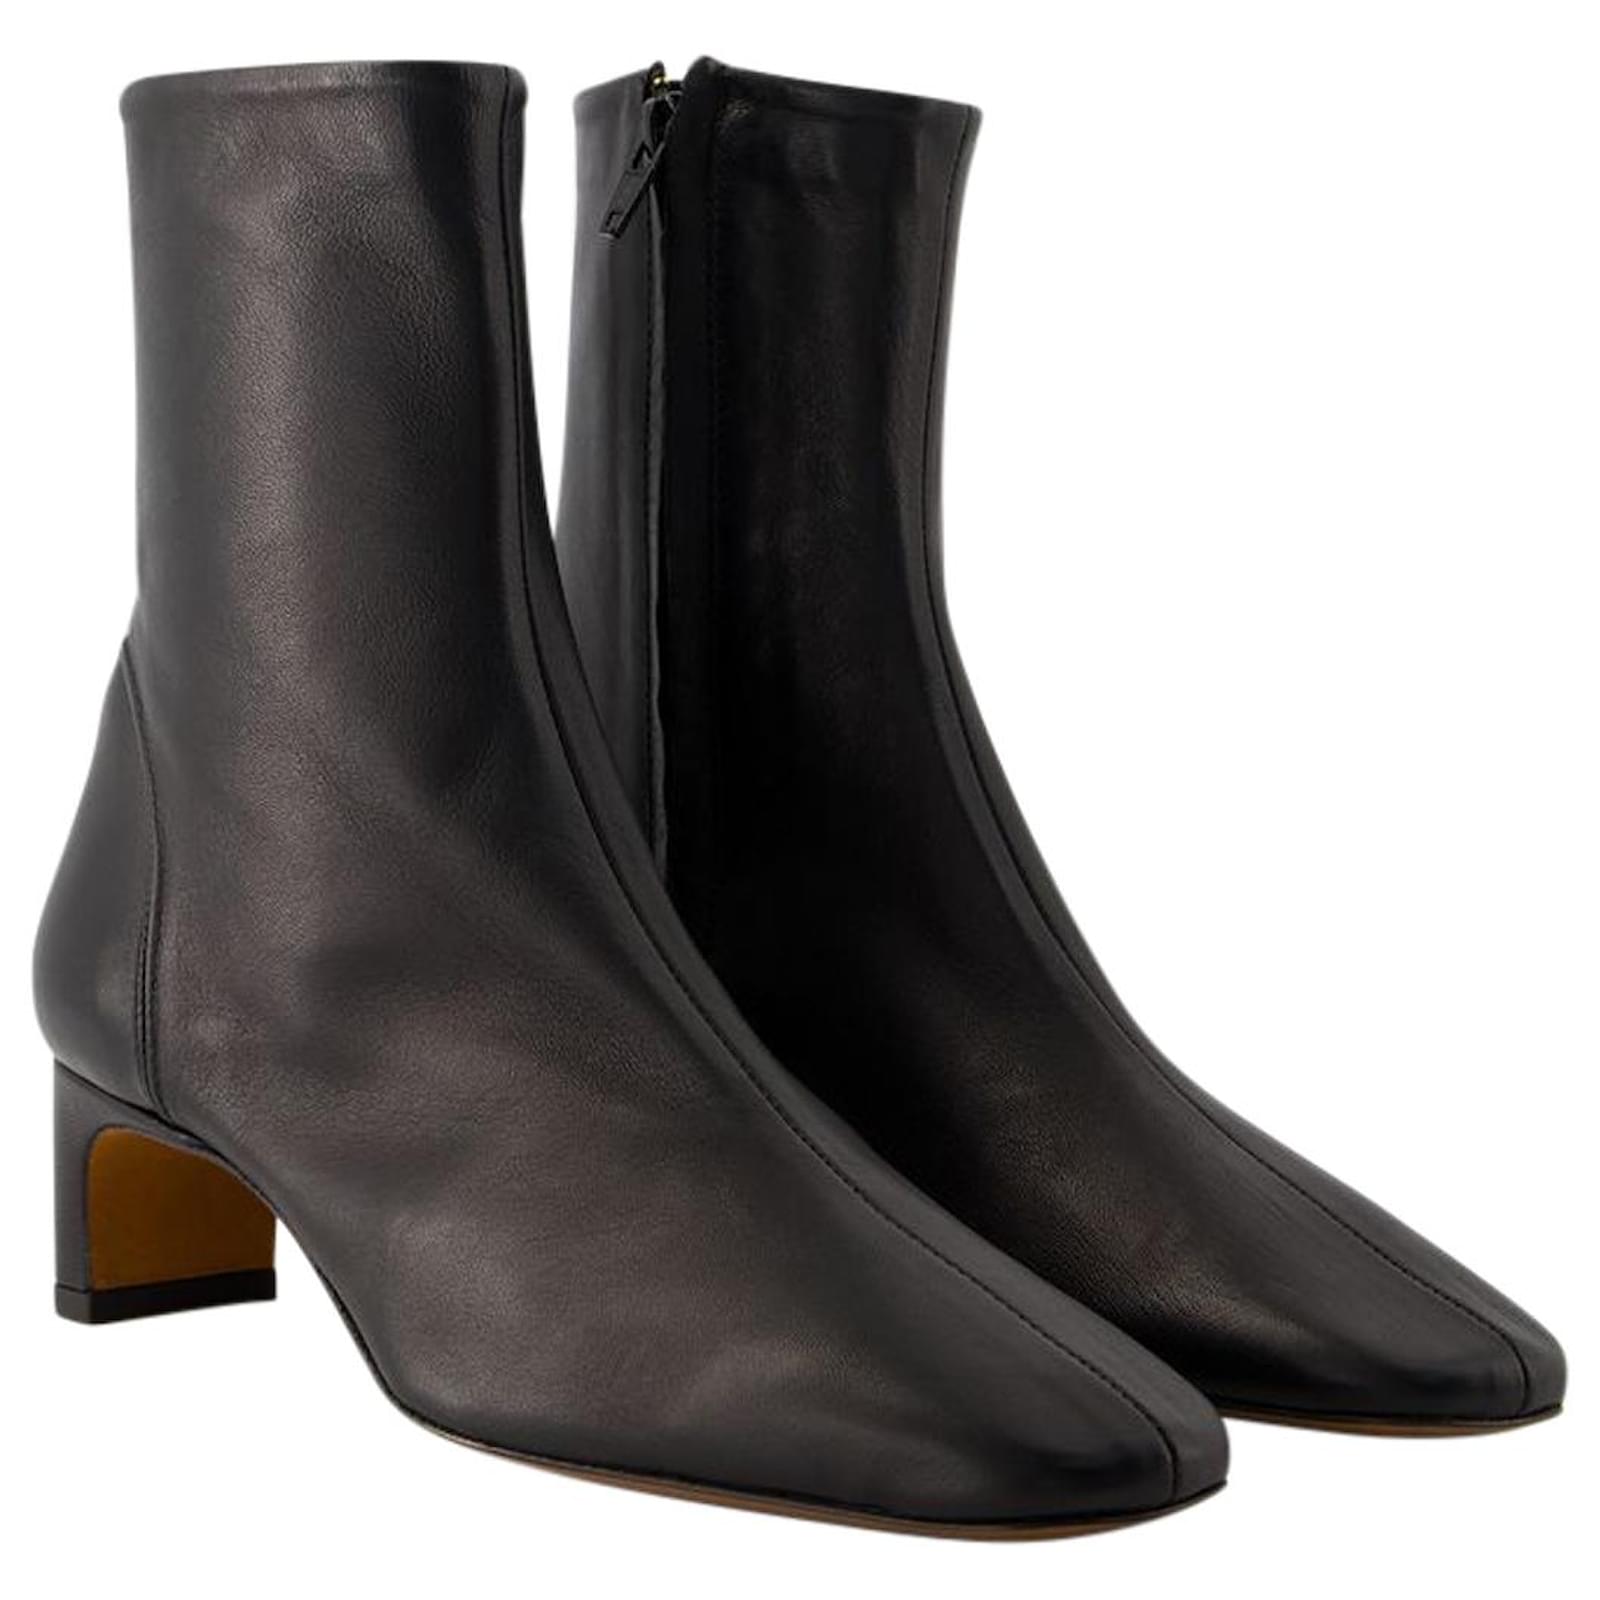 Doria Ankle Boots - Rouje - Leather - Black